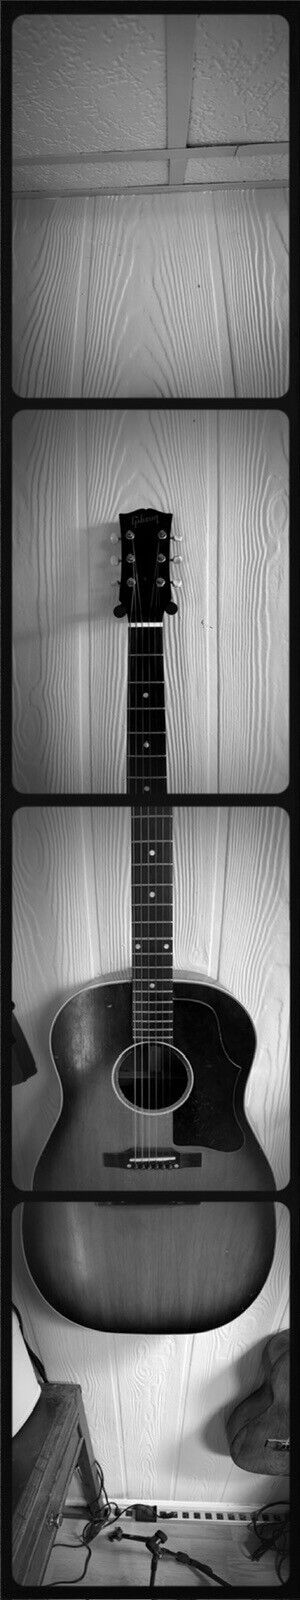 Vintage photo booth photo Strip Artistic Acoustic Guitar Hanging